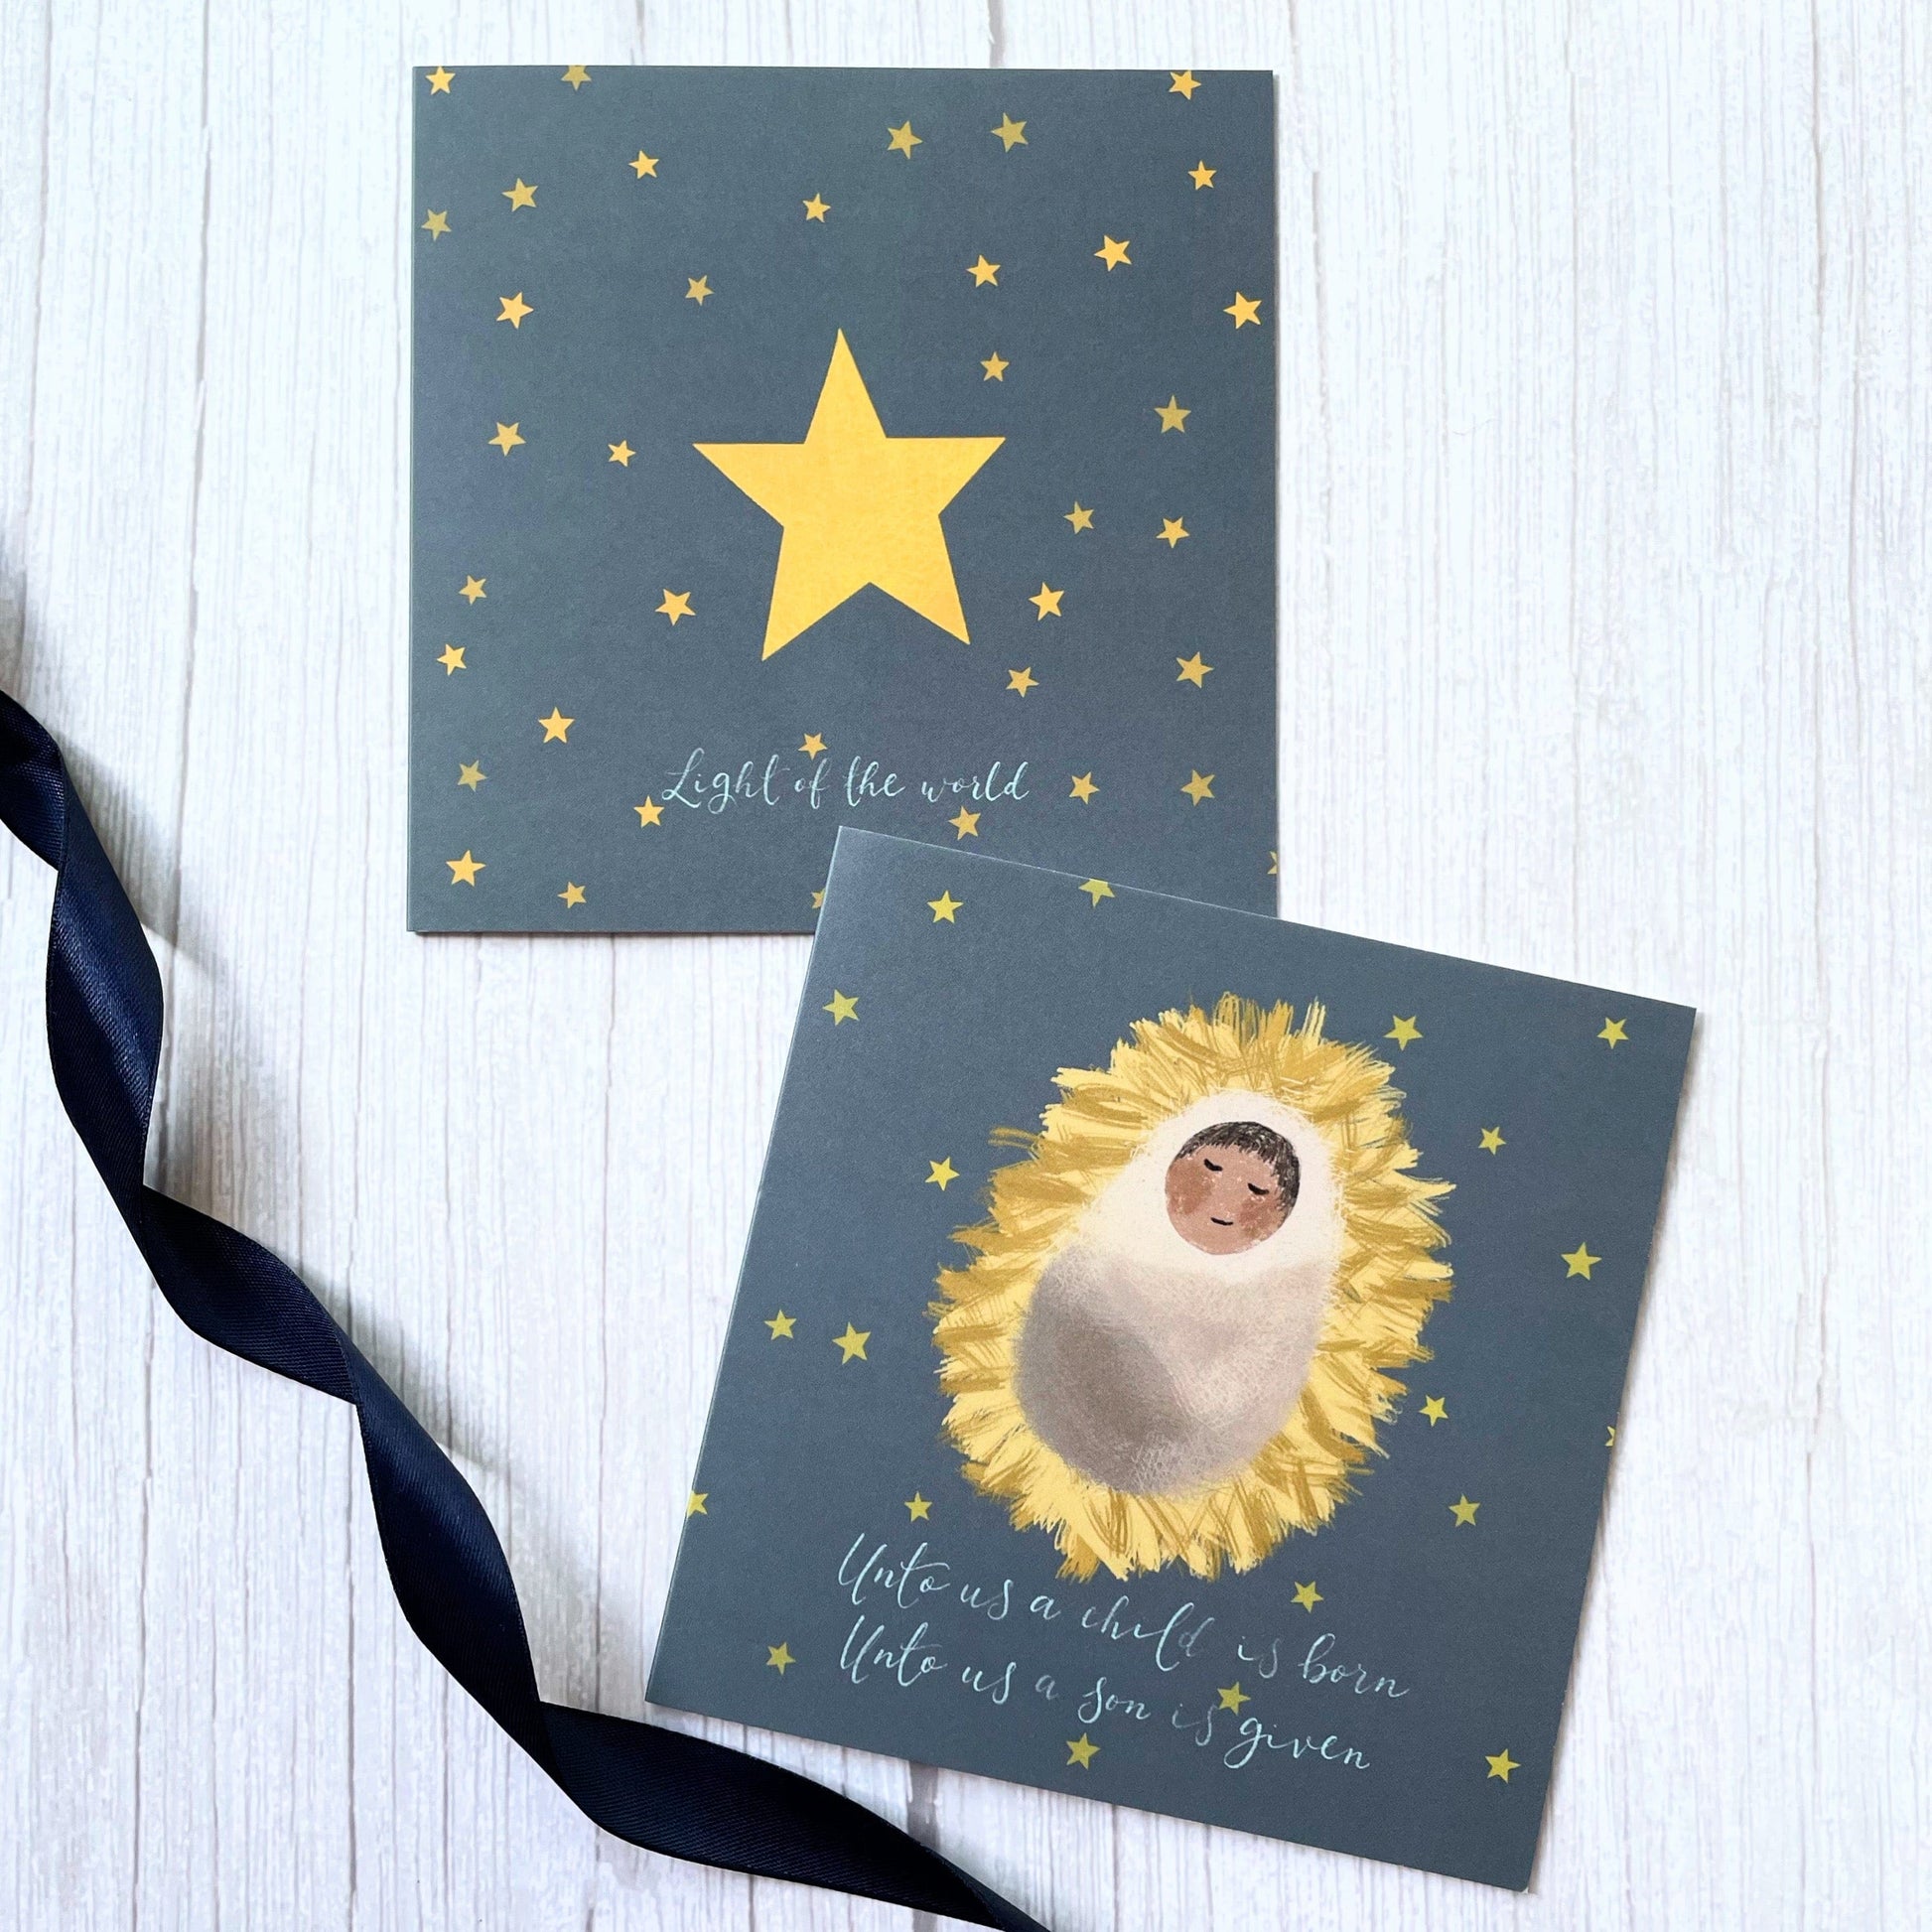 And Hope Designs Christmas cards - modern nativity and grey star set